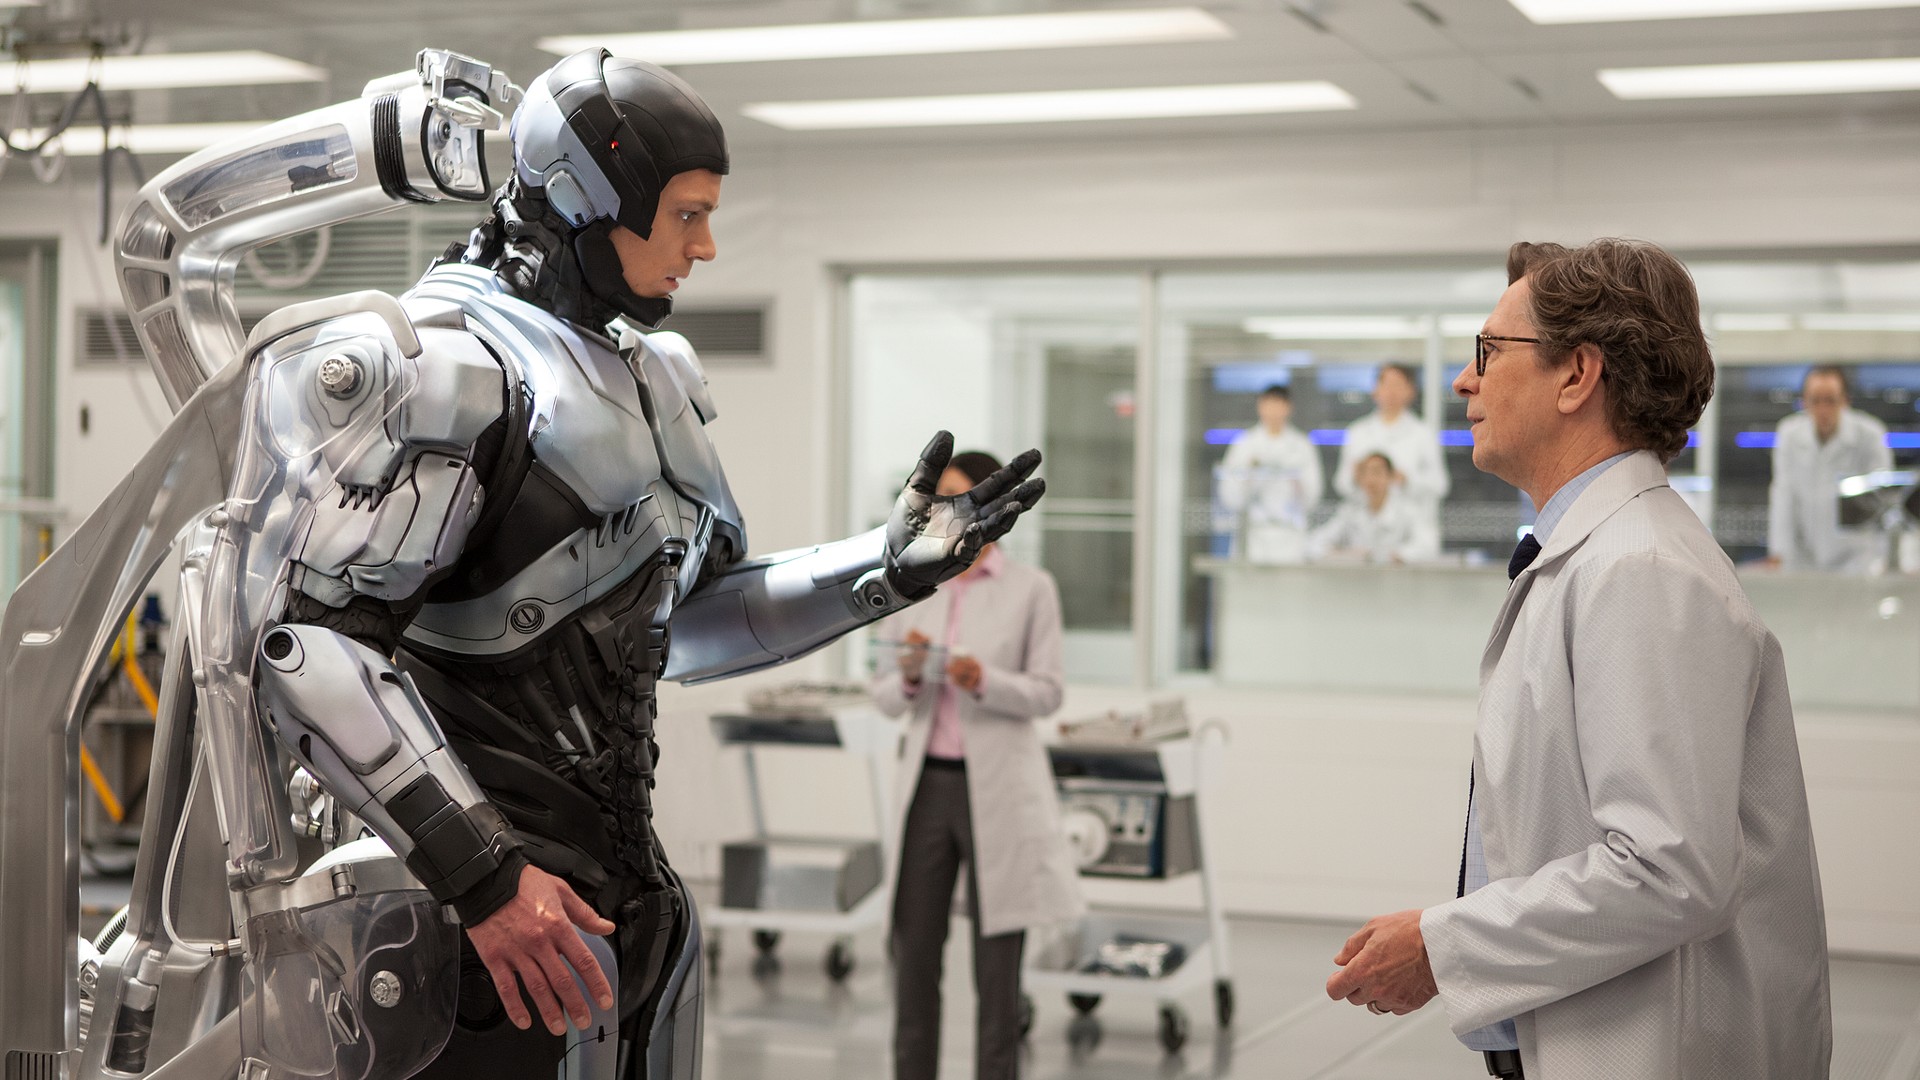 Still from the movie RoboCop (2014). Here we see RoboCop facing a scientist in a lab,